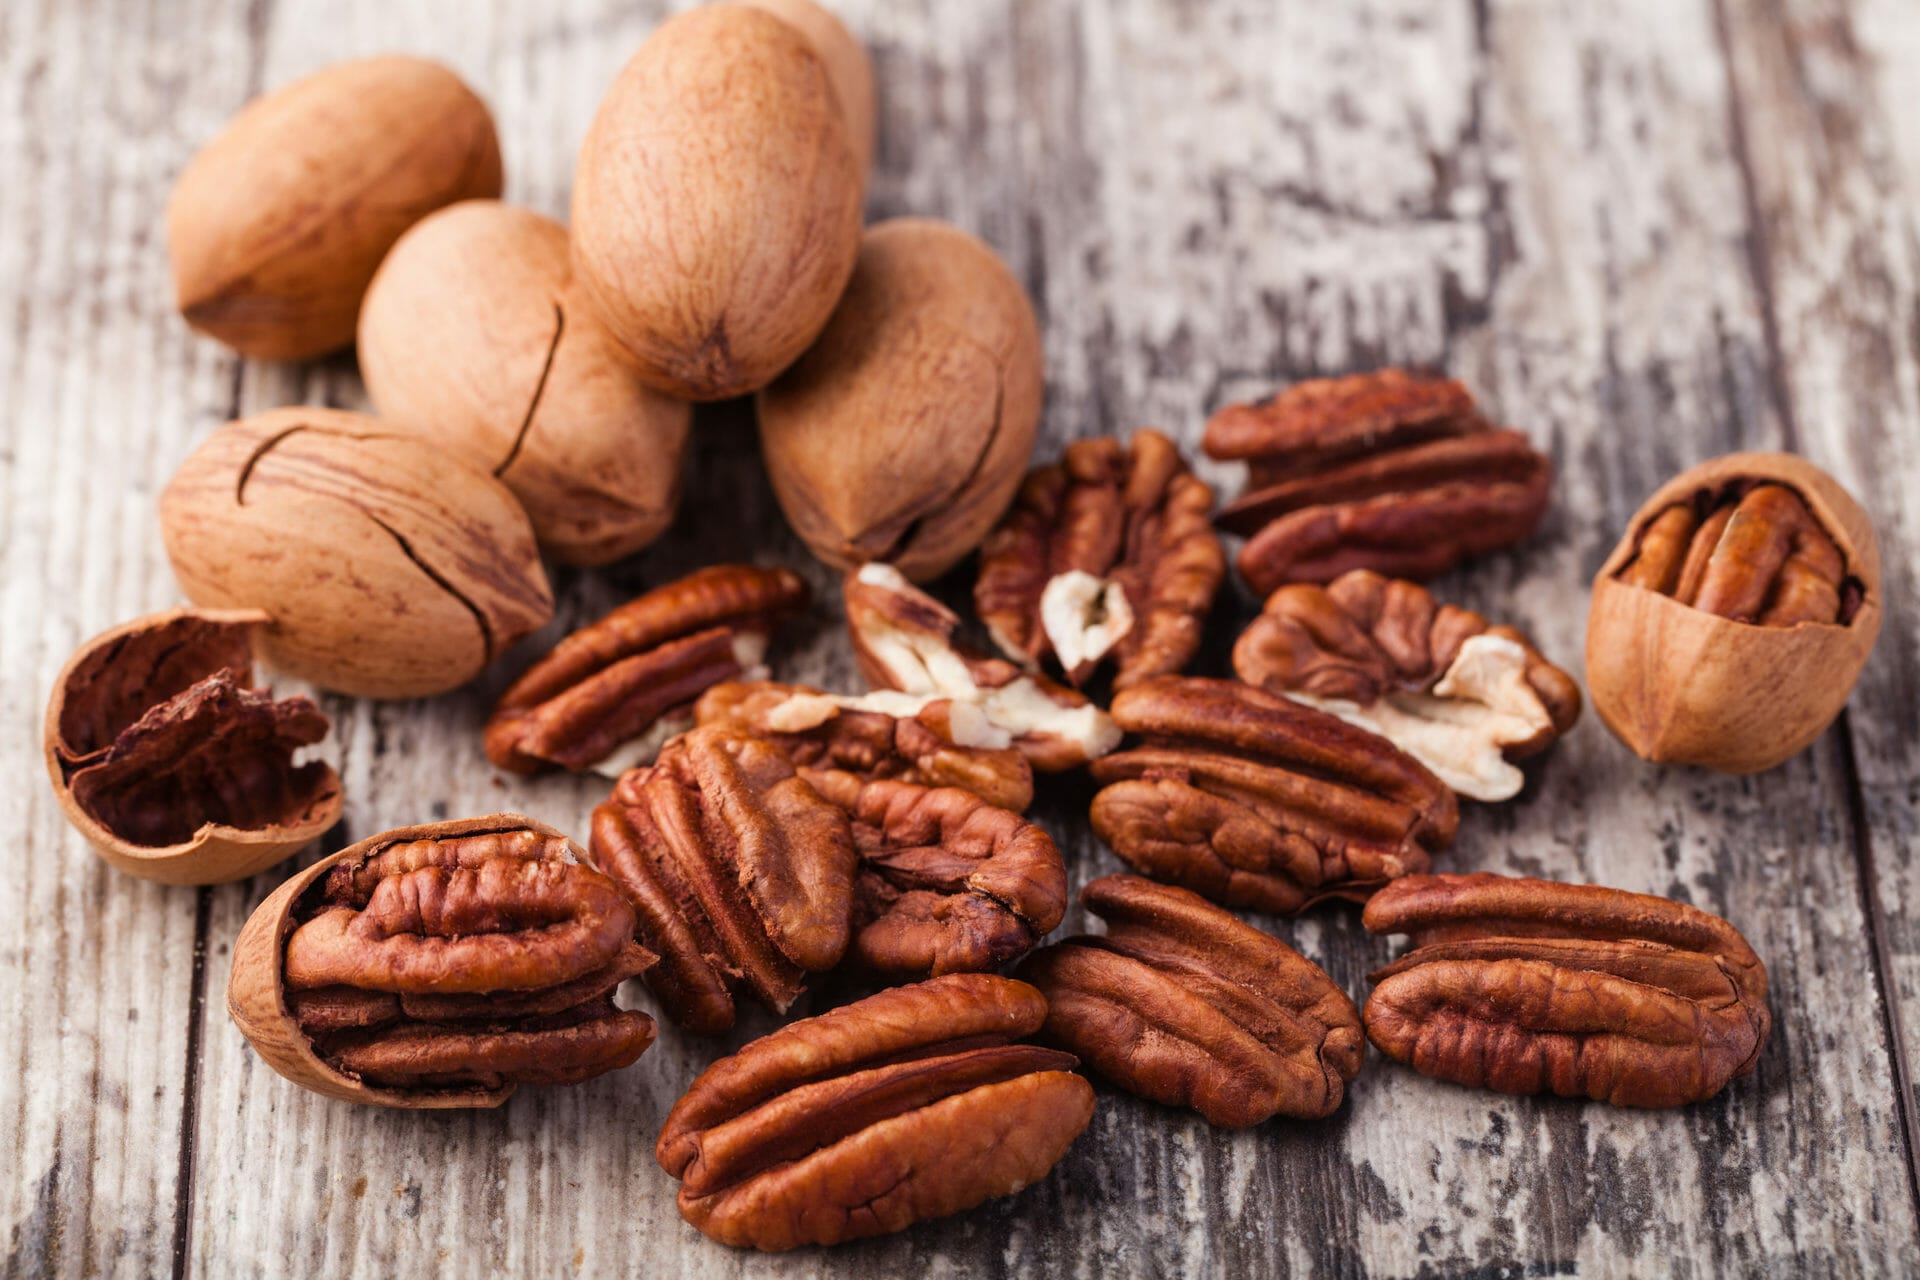 Pecans are relatively low in carbs